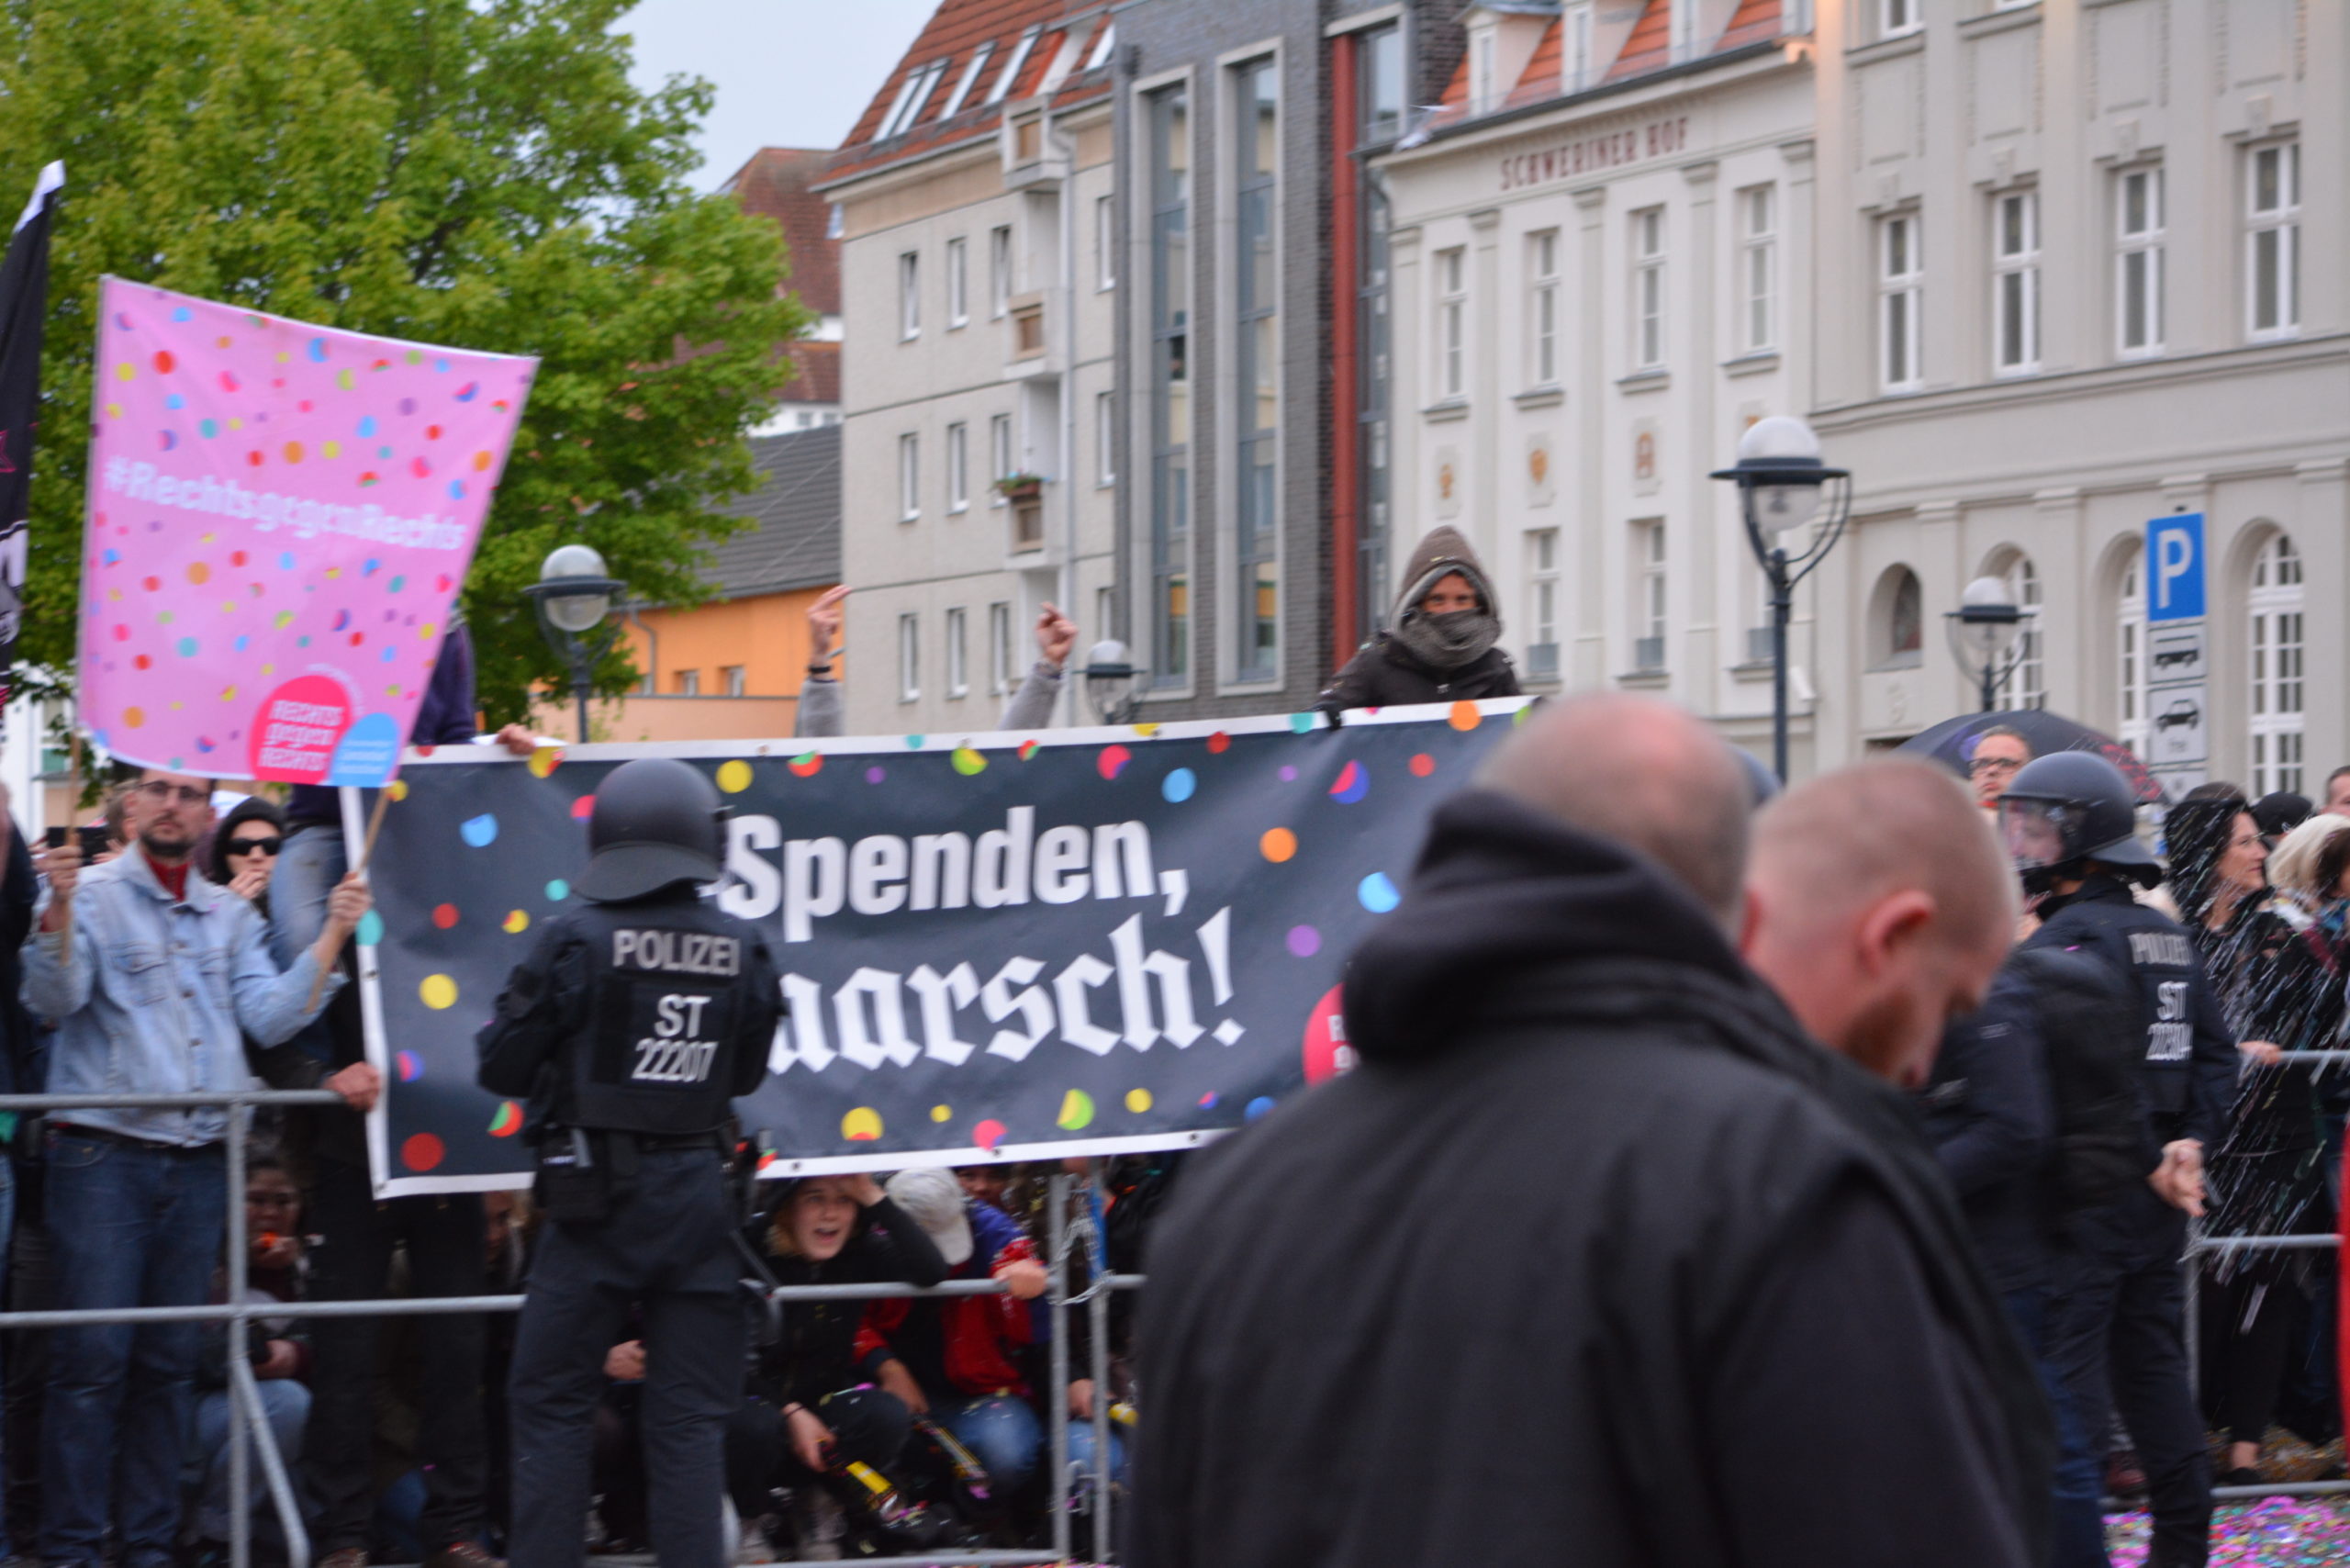 Far-right demos in Germany likened to era just before 